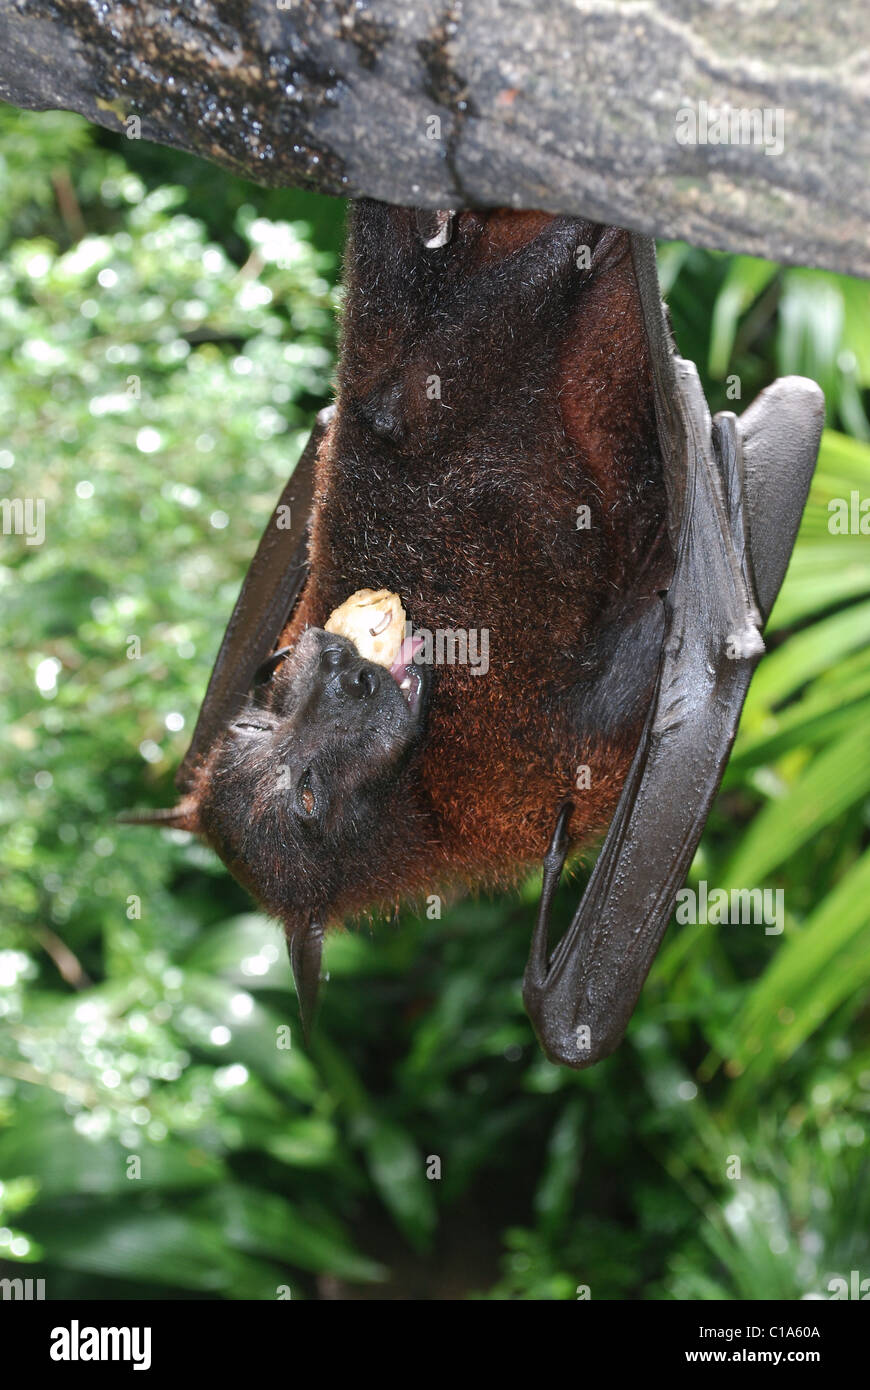 malayan flying fox , a species of bat eating fruit; singapore zoo Stock Photo